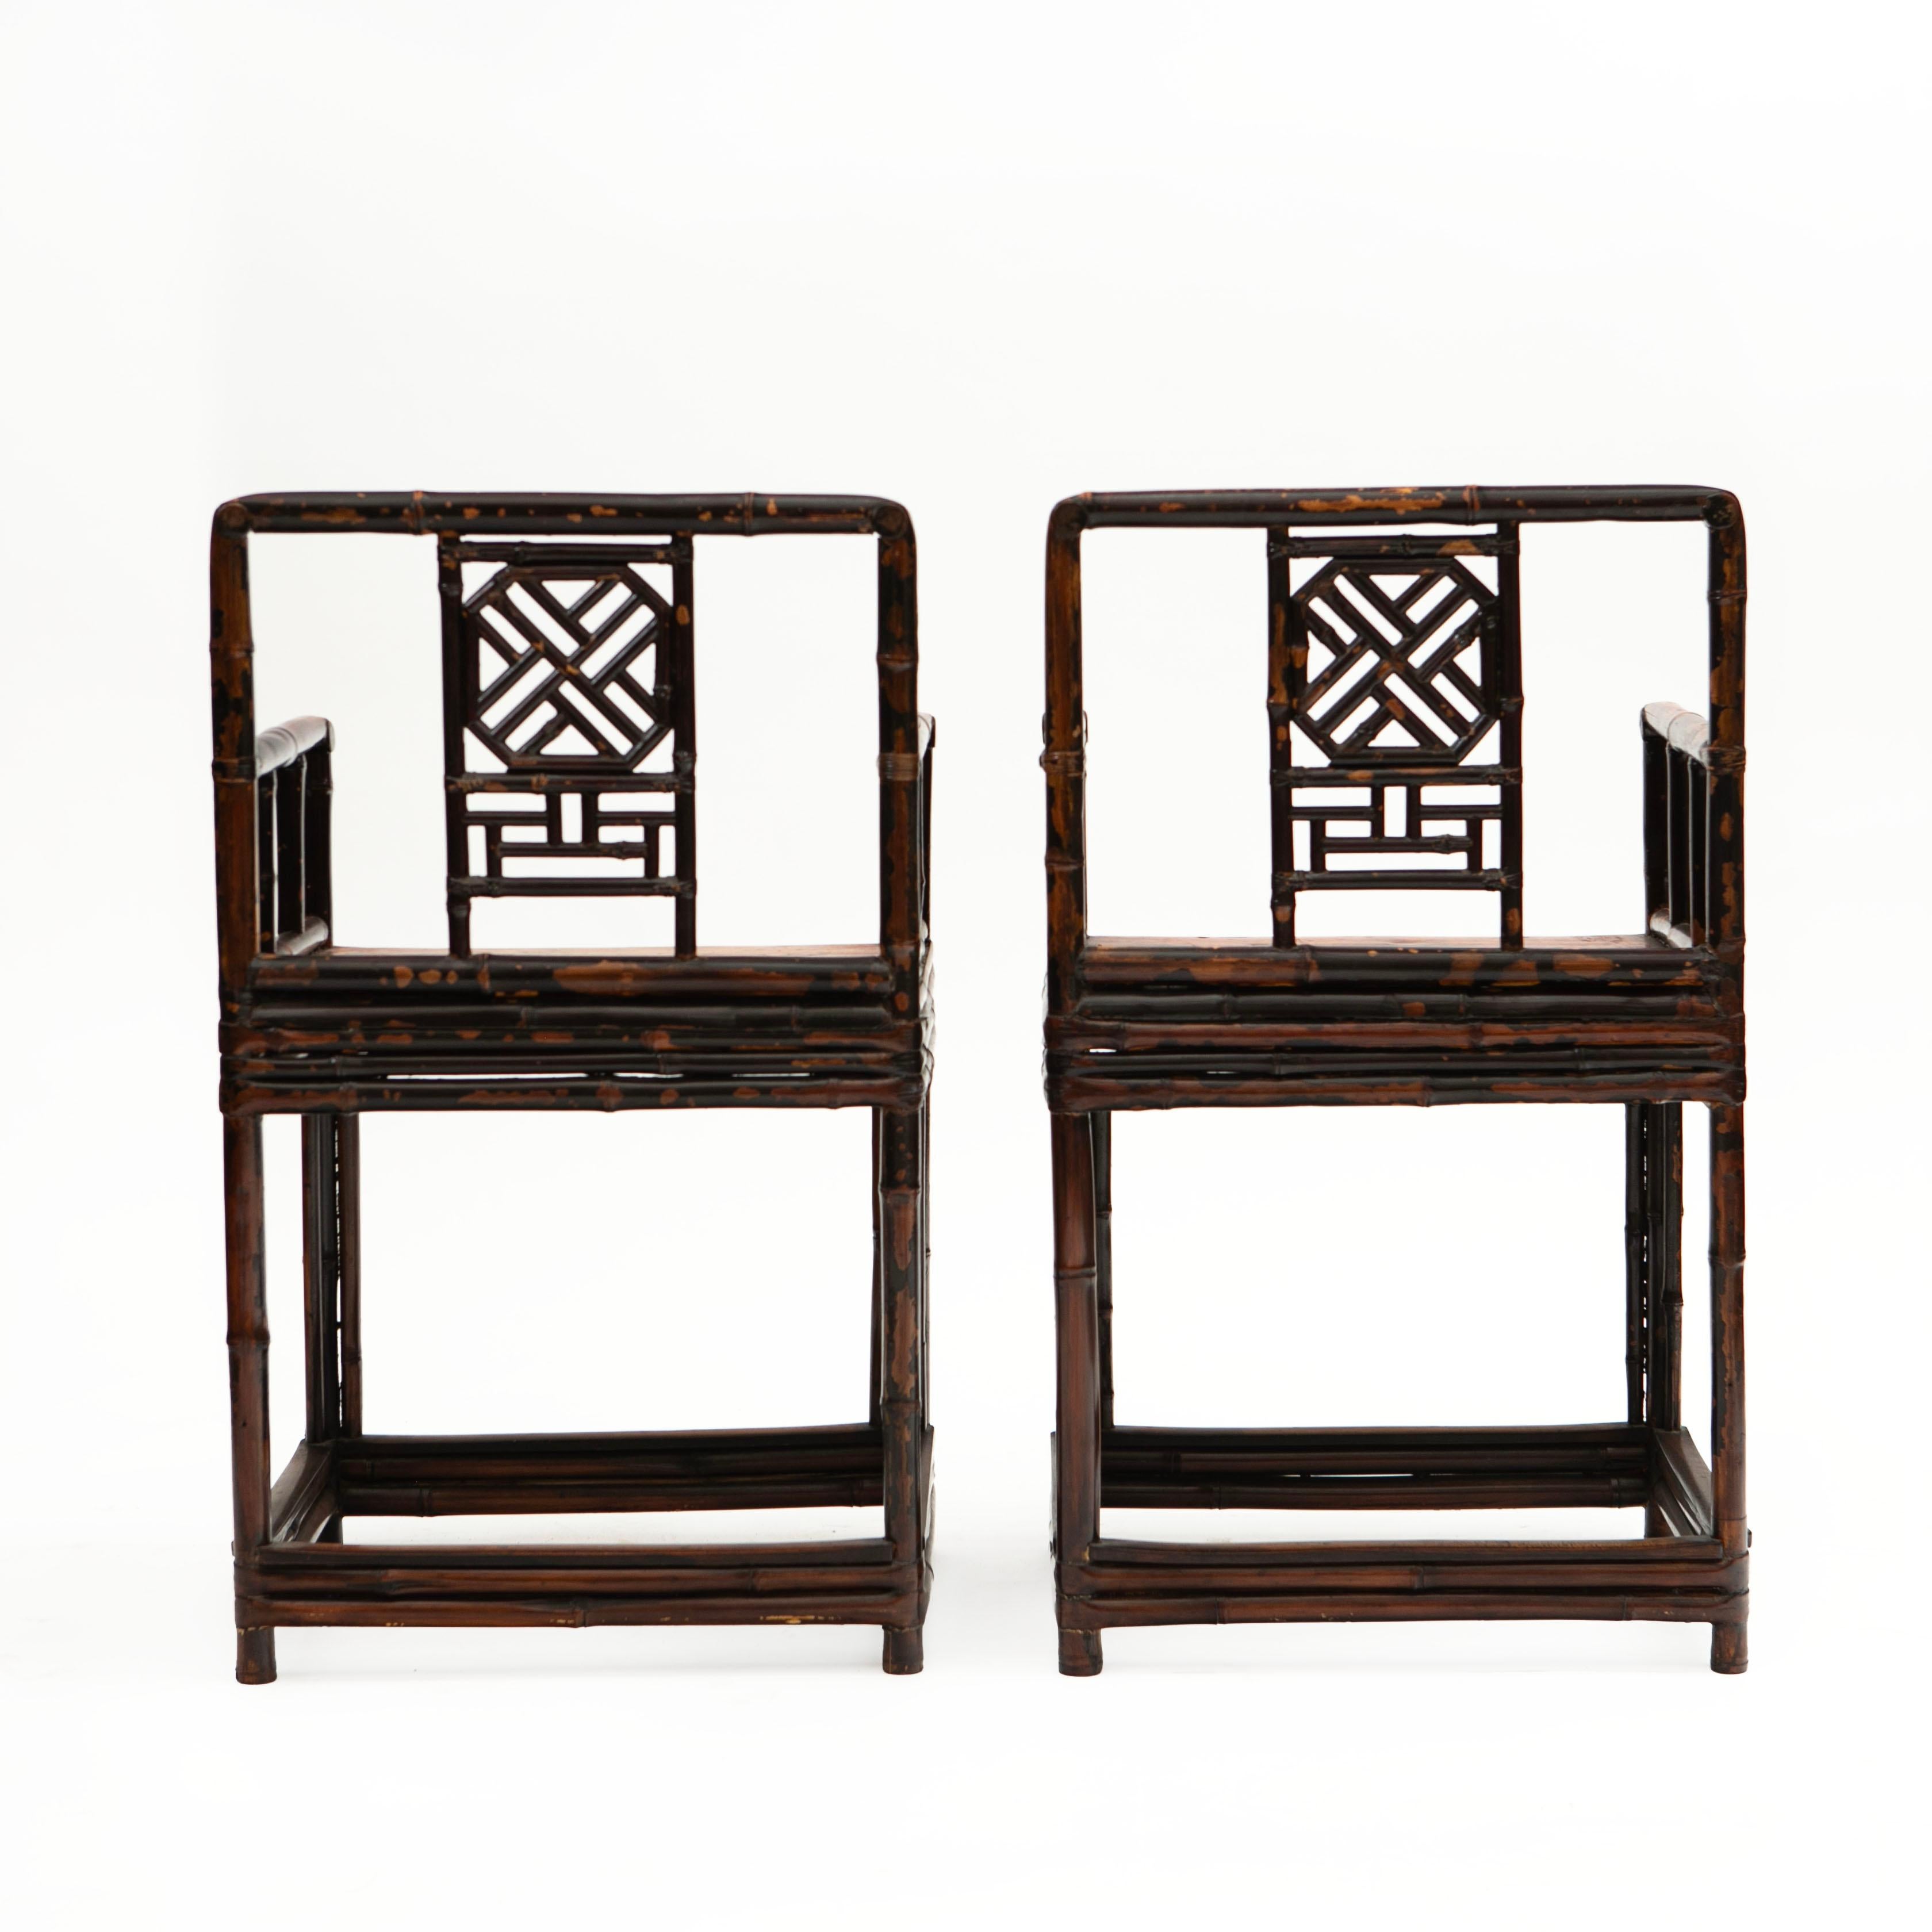 Lacquered Pair of 19th Century Chinese Qing Period Bamboo Arm Chairs with Burgundy Lacquer For Sale